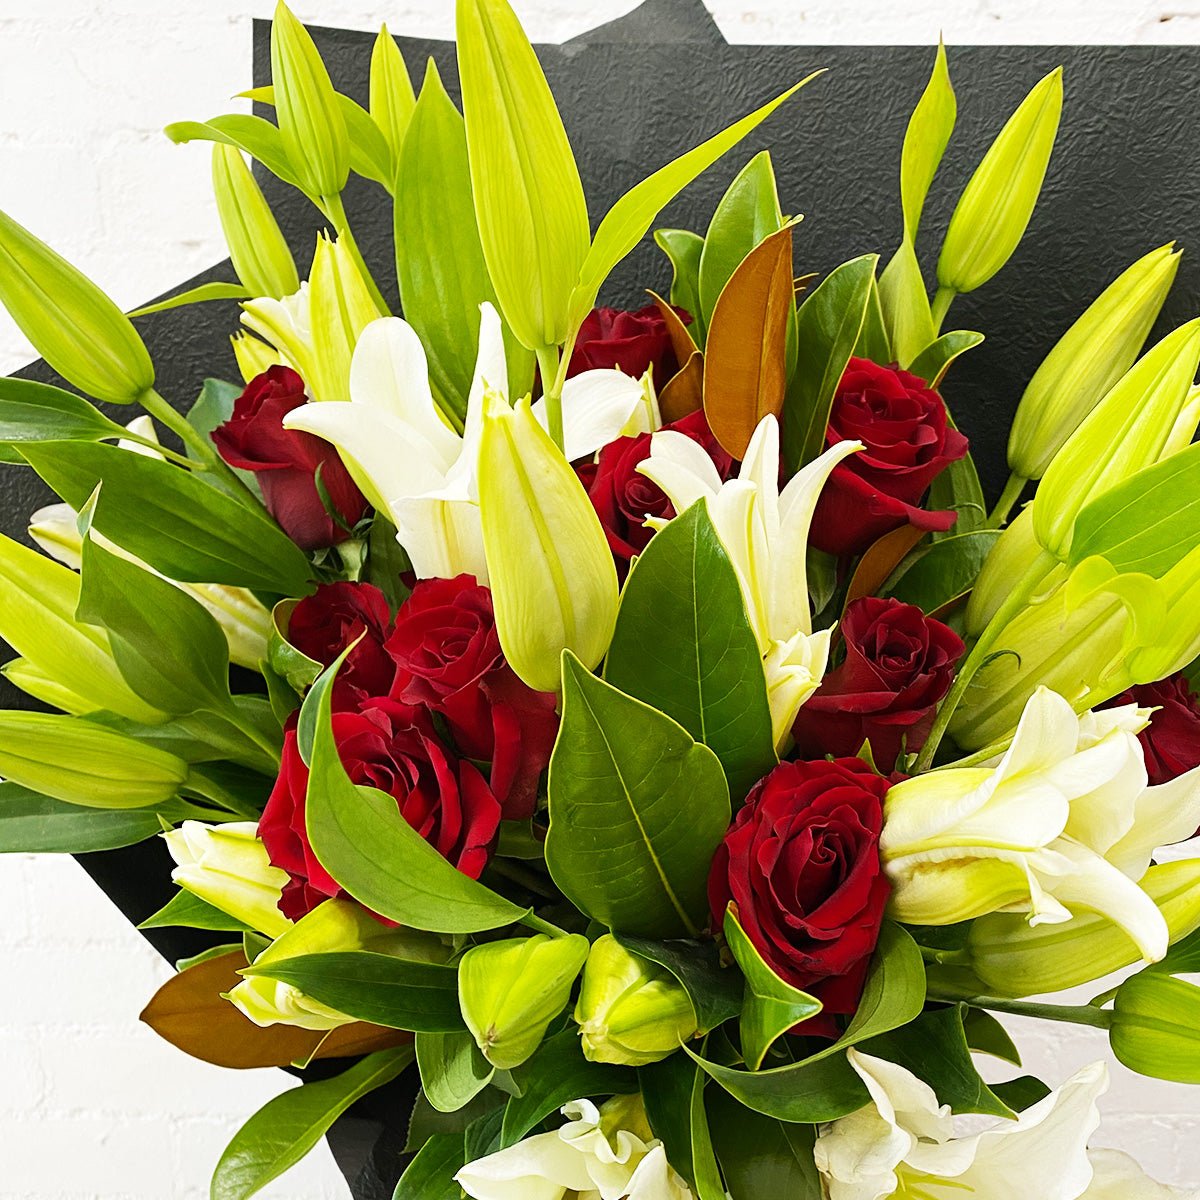 Roses and Lillies - Amazing Graze Flowers